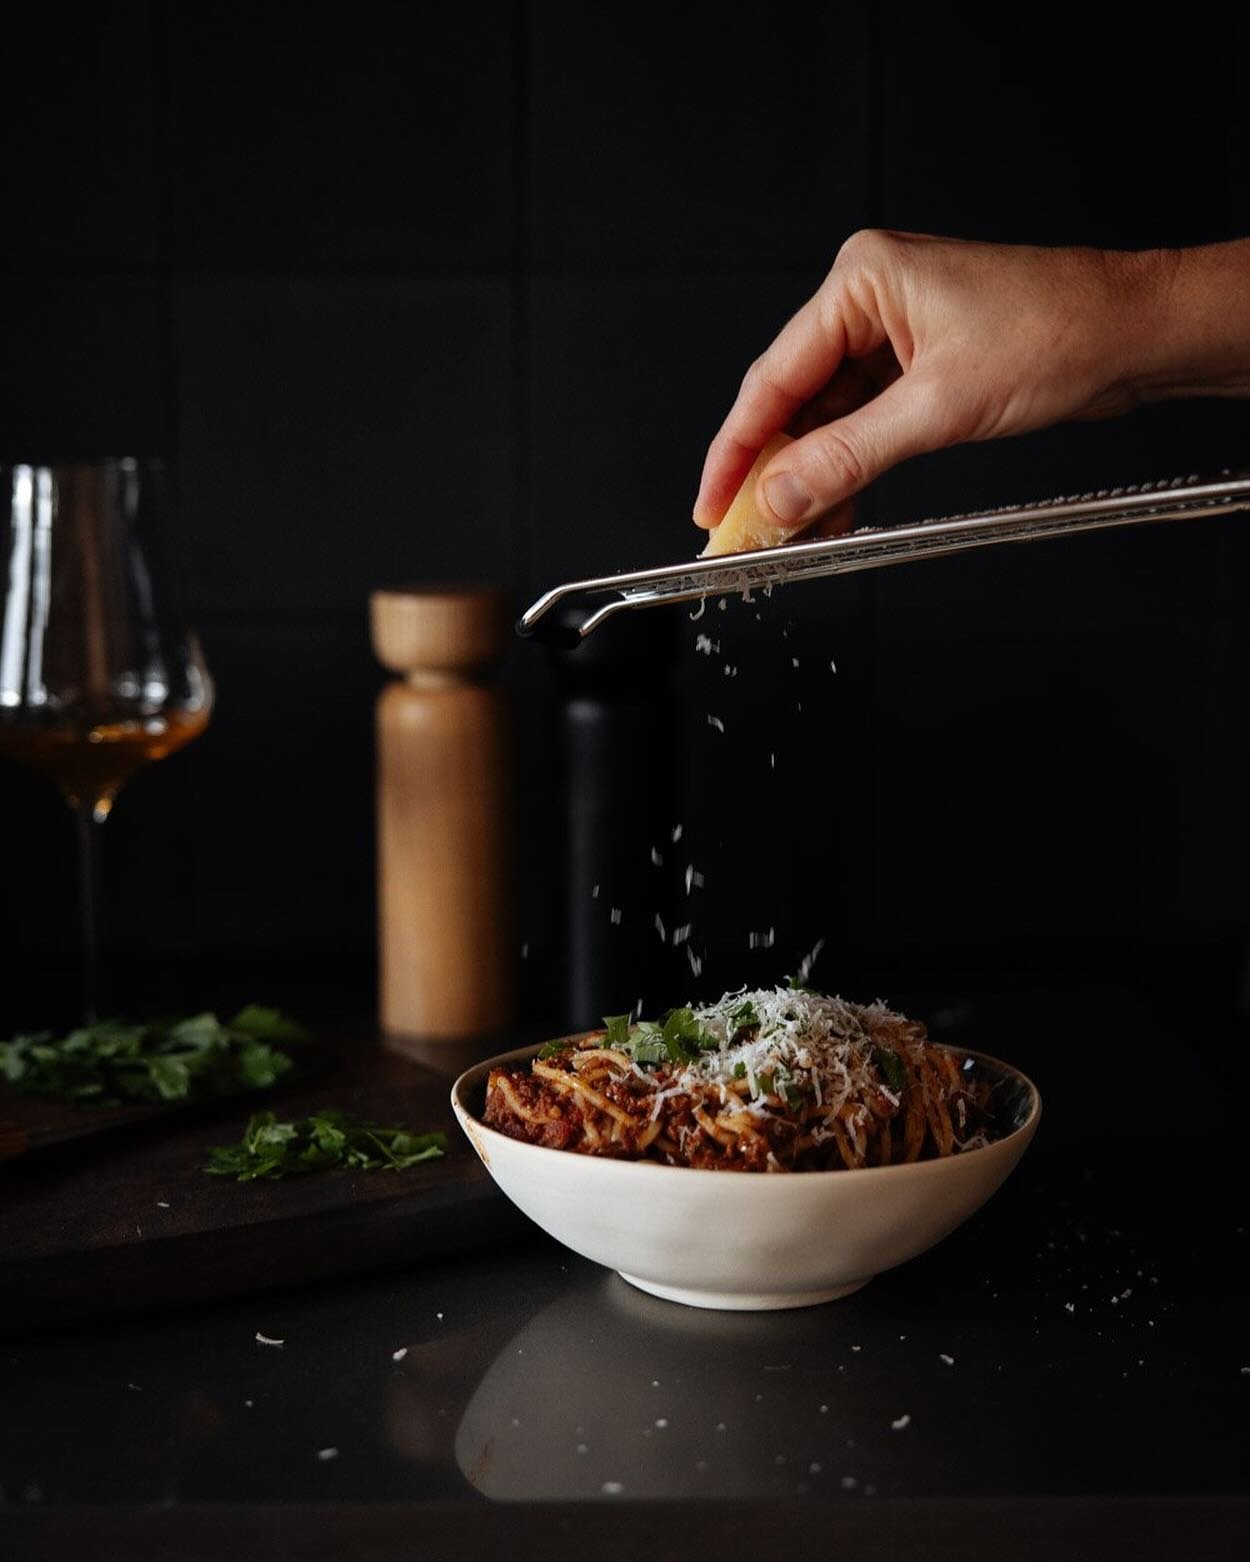 Comforting bowl of pasta + glass of vino makes for a perfect night in. 

What are your plans this evening? 

Image @leantimms 
Styling @lynda.gardener 

#hunterhuonvalley #accomodation #glenhuon #sustainable #foodstyling #comfortfood #pastaandwine #t